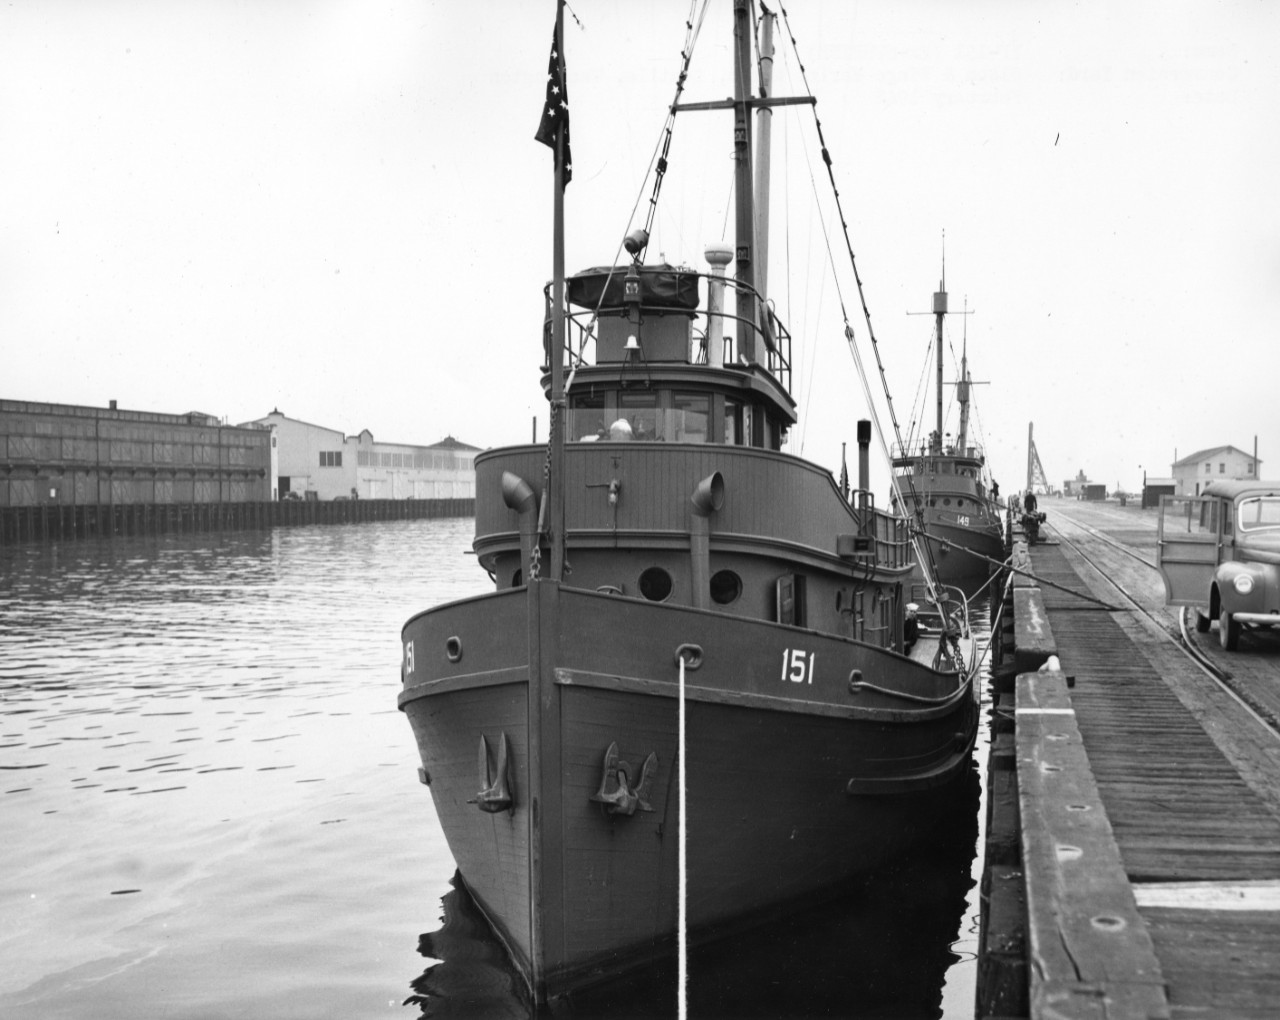 YP-151 (ex-Sunrise) pierside during her conversion in February 1942, with YP-149 (ex-Farallon) moored astern. Note style of her identification number, curious (or perhaps suspicious) sailor looking forward at the photographer from behind the deck...